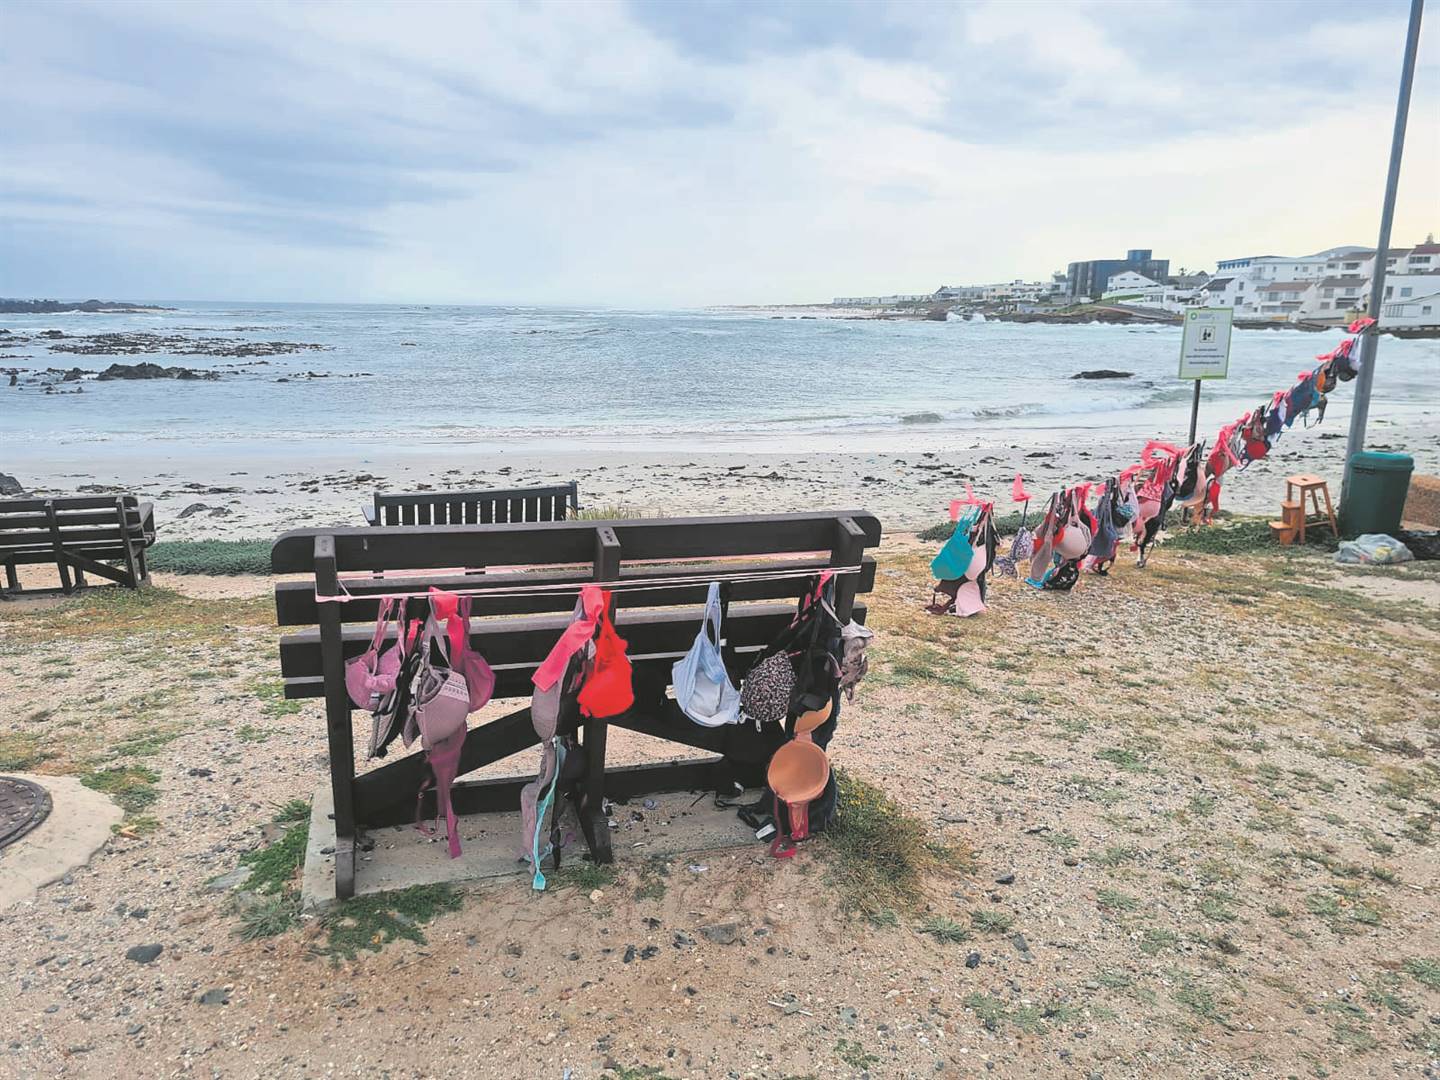 Bras seen hanging in Bloubergstrand used to create greater cancer awareness